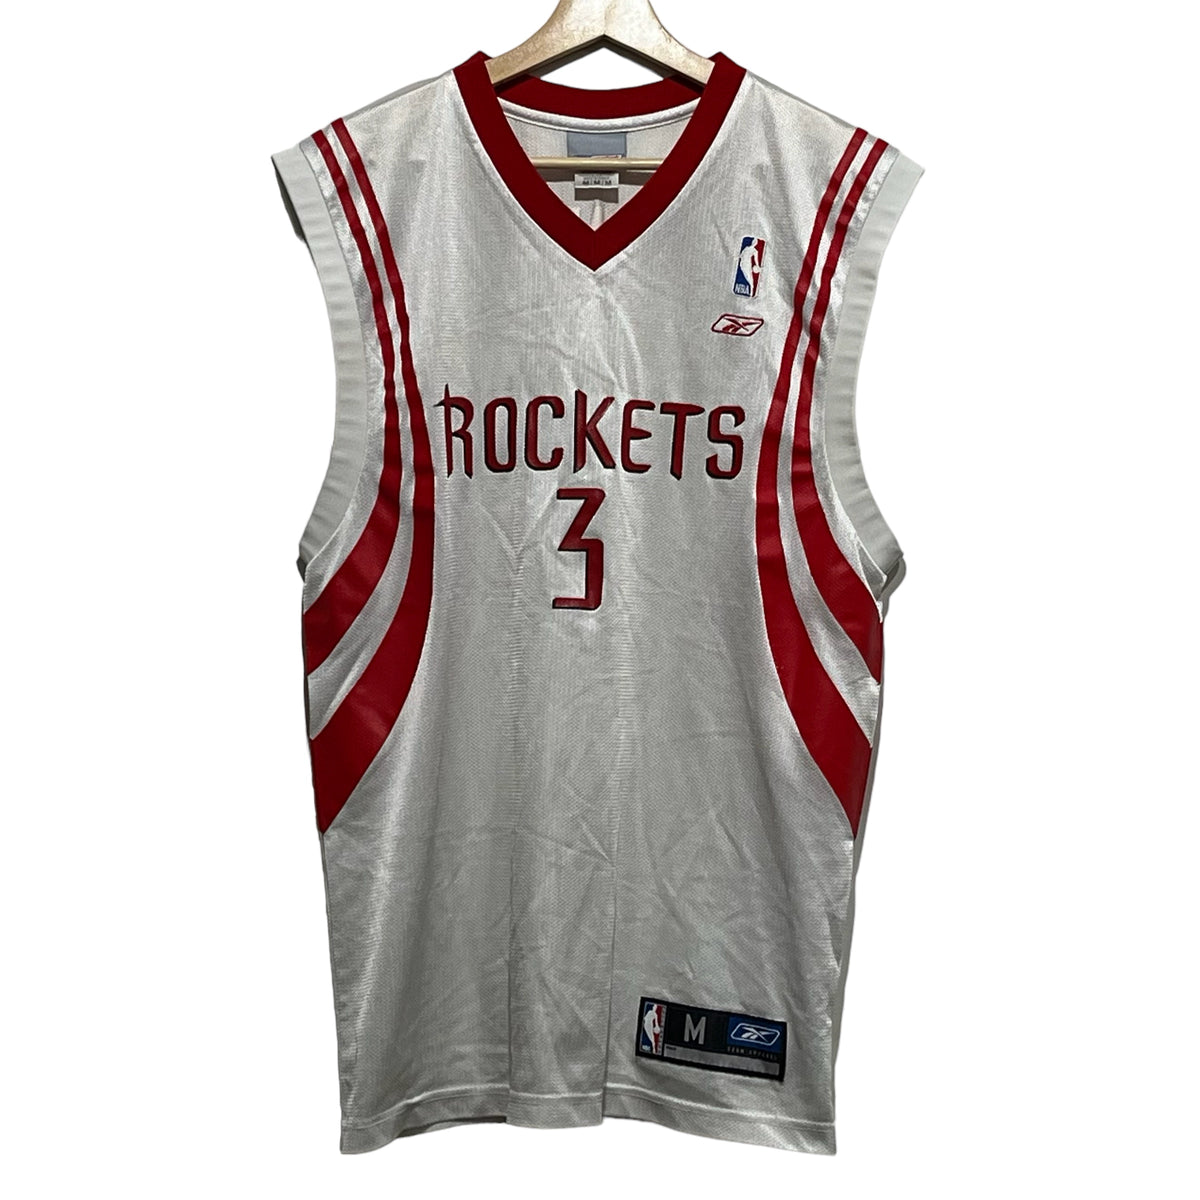 Houston Rockets Pinstripe City Jerseys Forever Associated With Steve Francis  - Sports Illustrated Houston Rockets News, Analysis and More